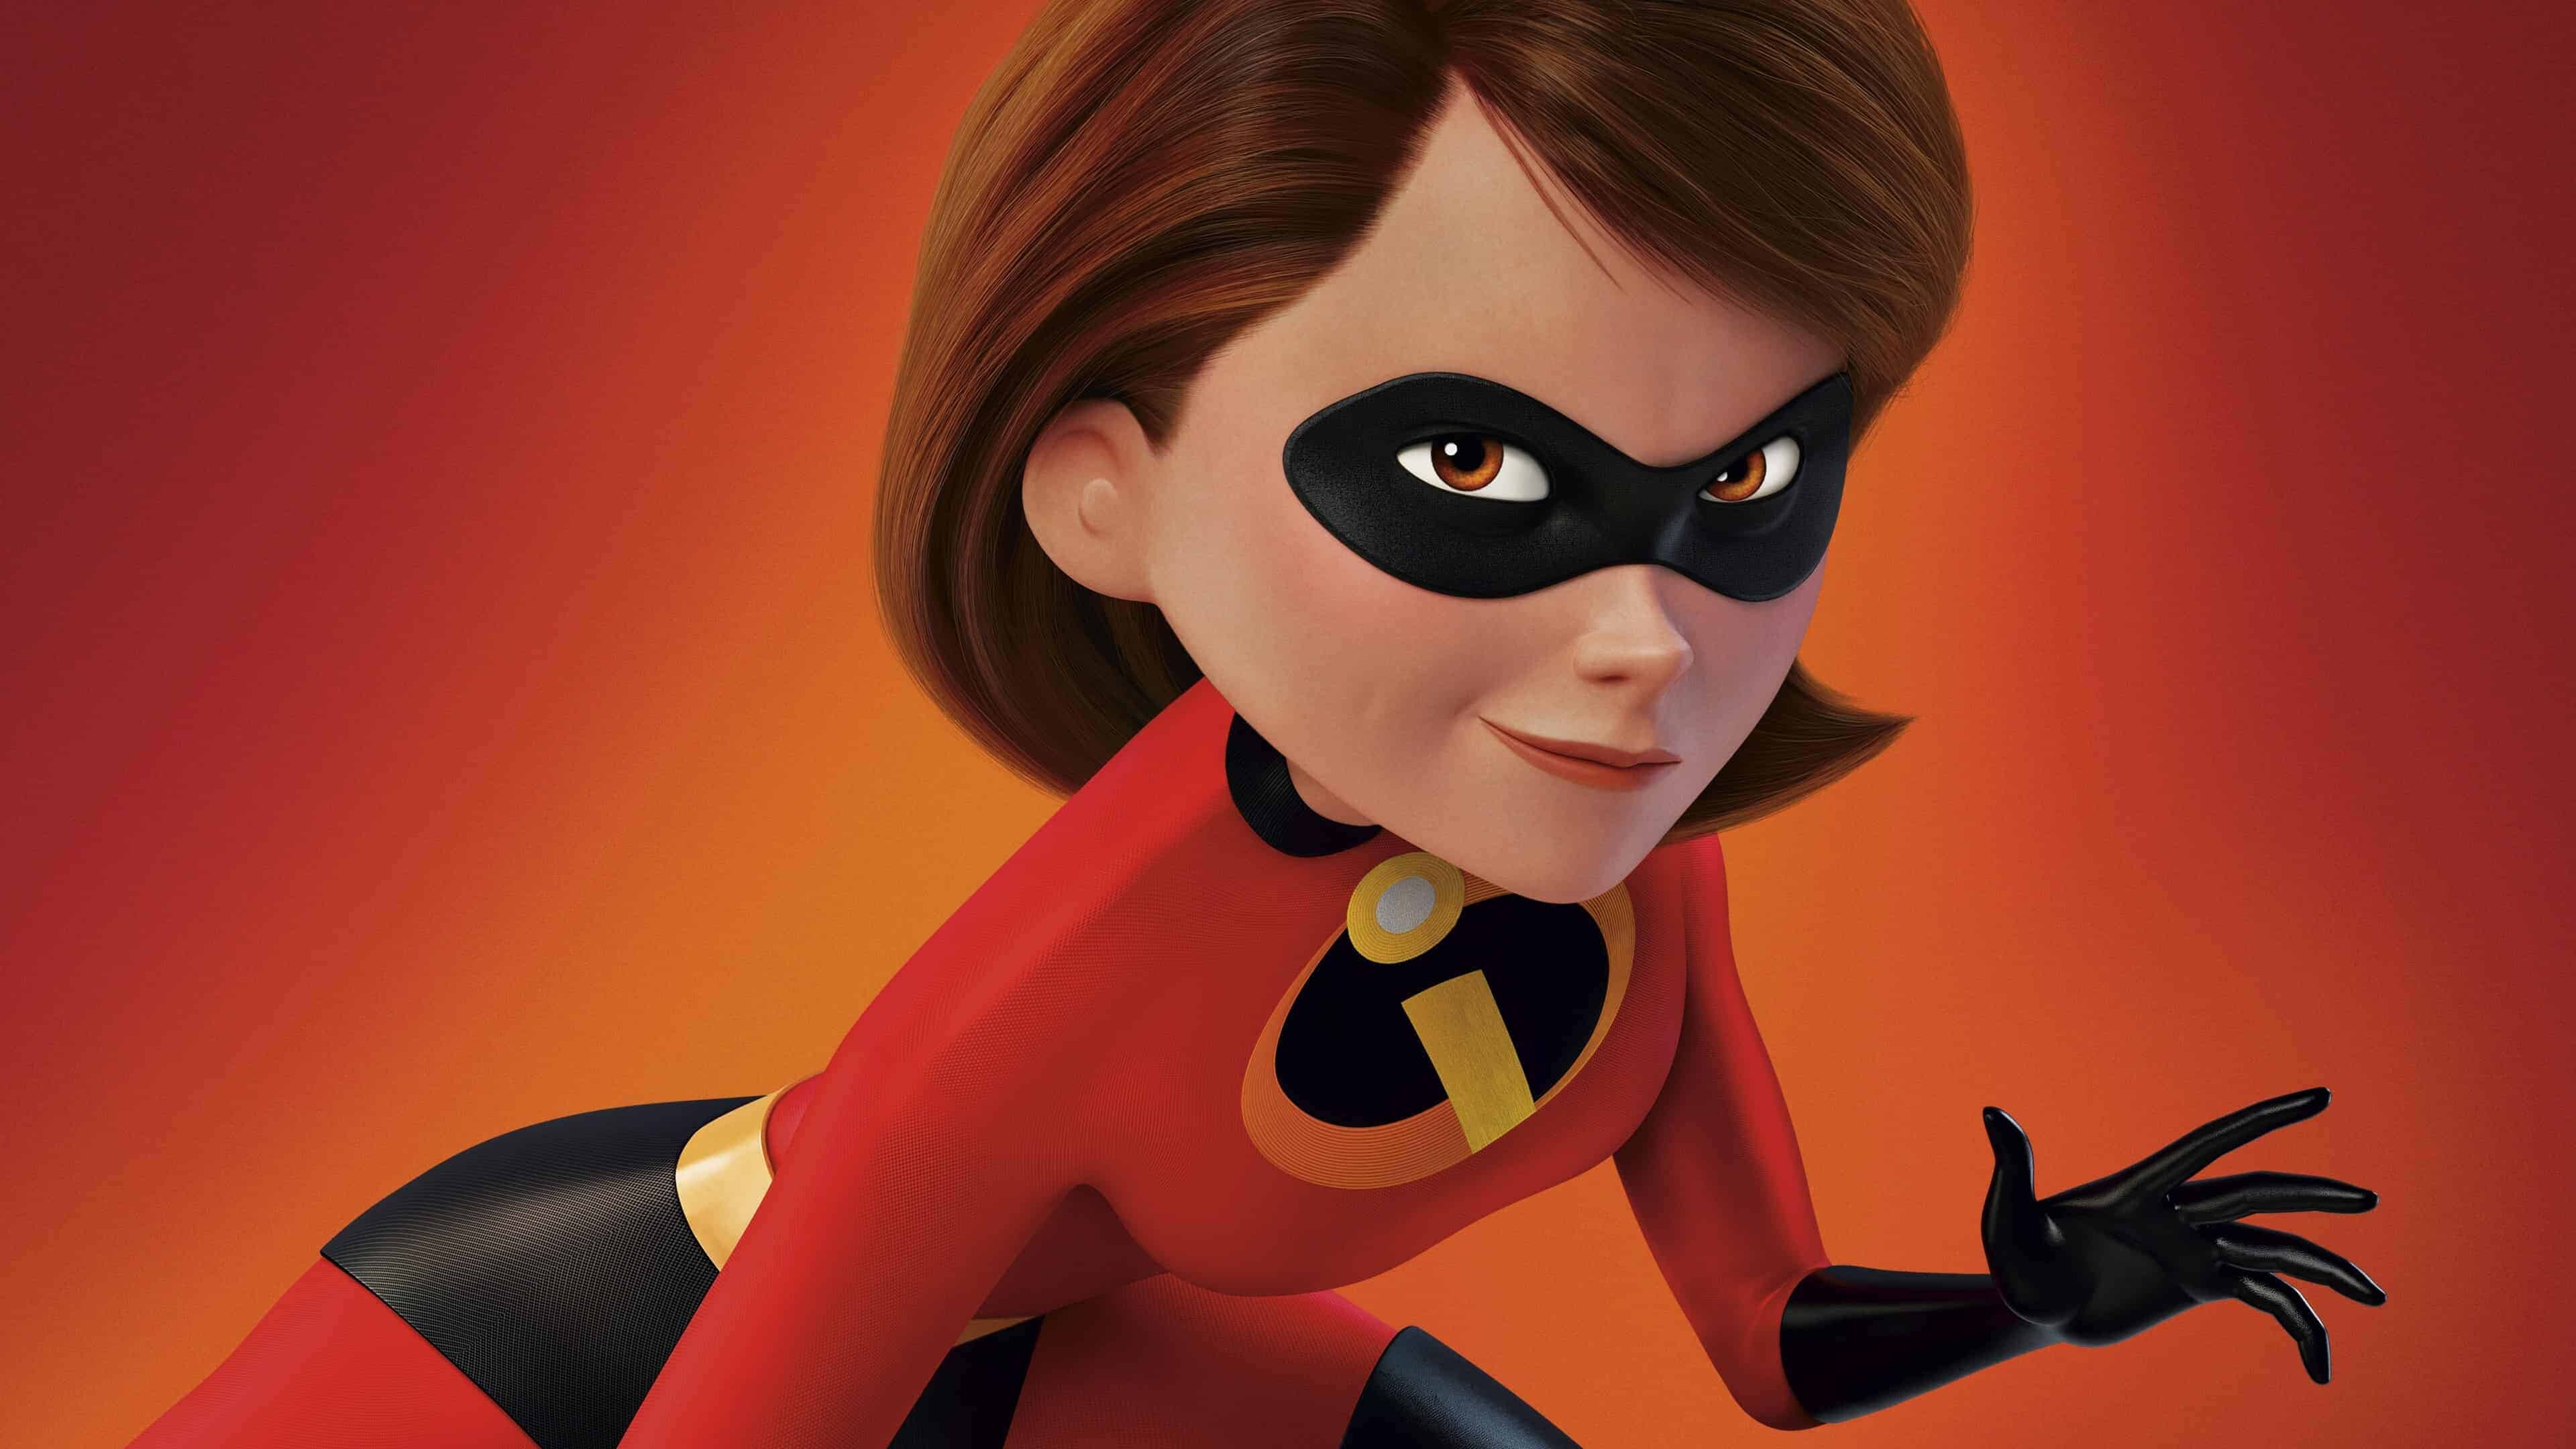 The Incredibles: Elastigirl, Bob's wife who has the ability to shapeshift her body. 3840x2160 4K Wallpaper.